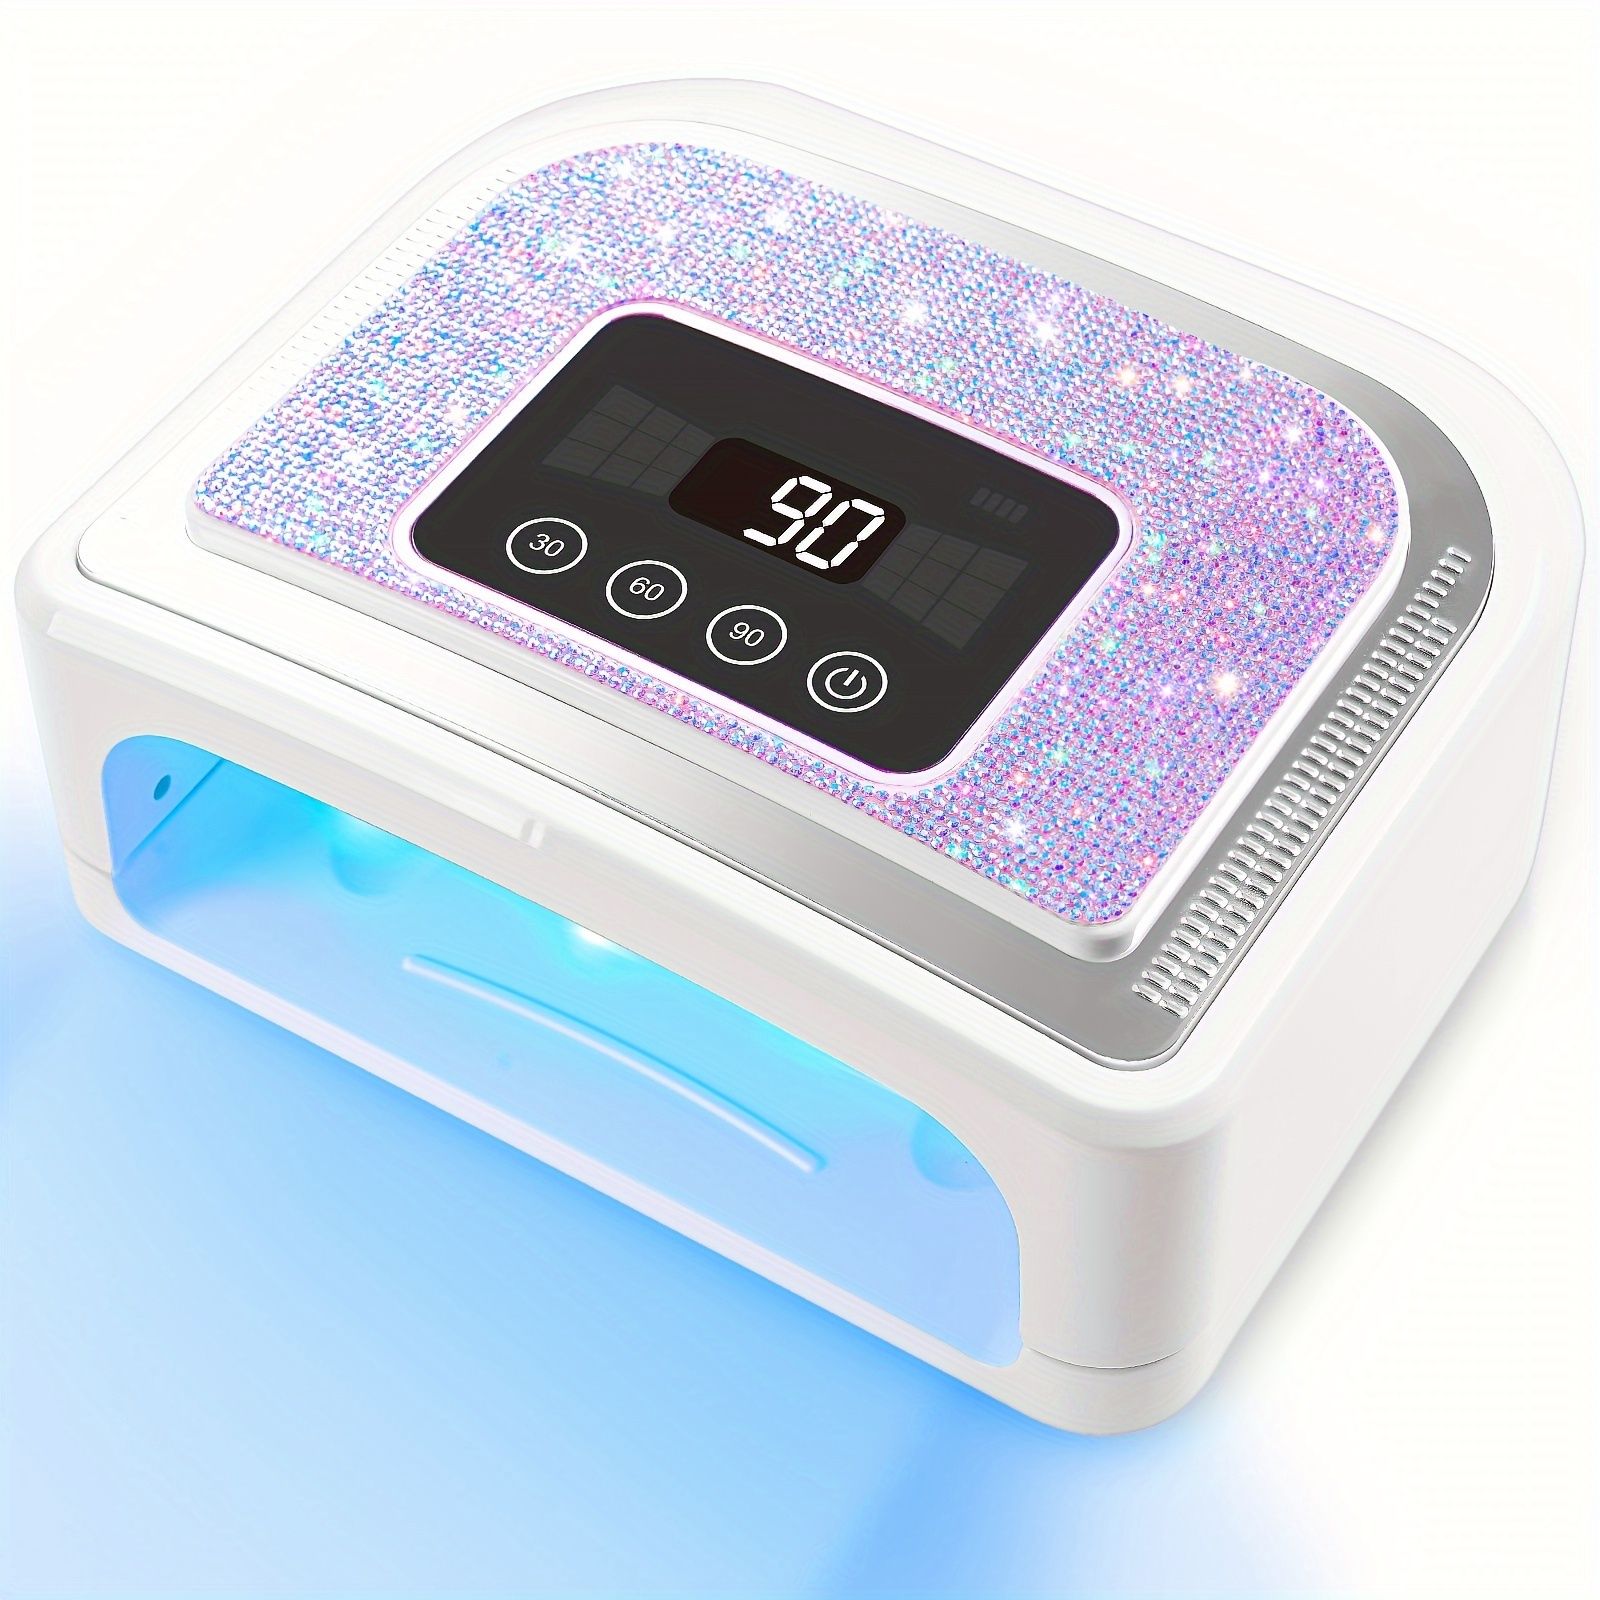 

Rechargeable Cordless Uv Nail Lamp For Gel Nails, 120w Led Nail Lamp With 4 Timer Modes, Gel Nail Light Decorate With Sparkling Nail Rhinestones Diamond